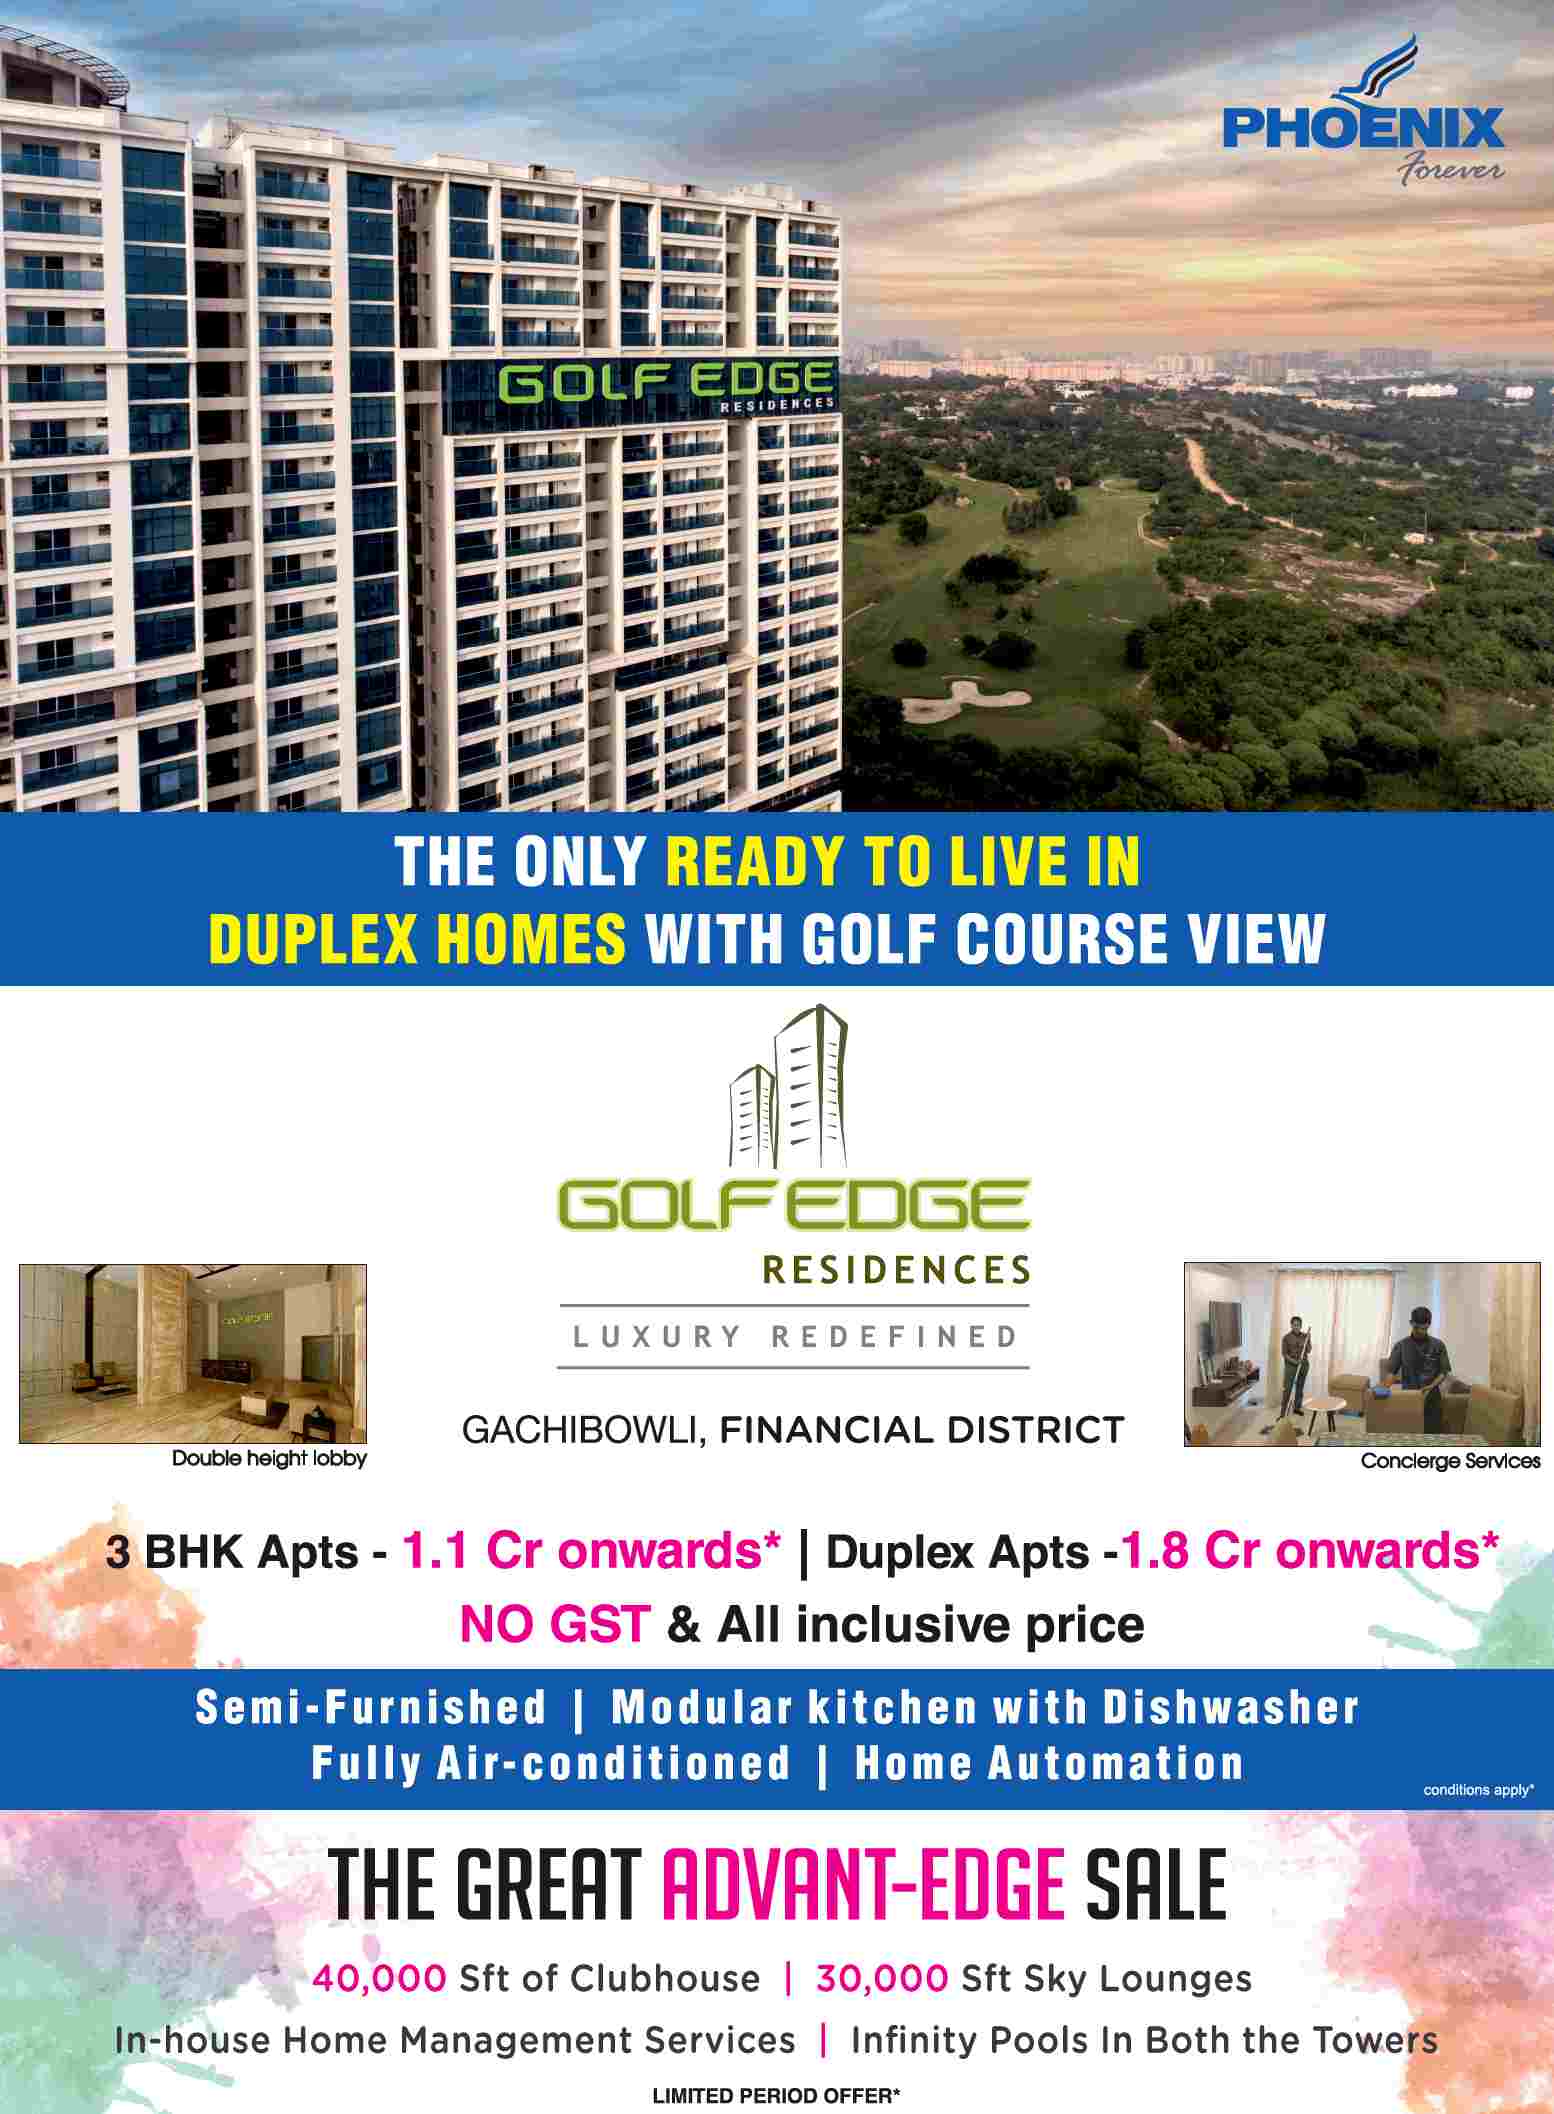 Live in the only ready to live duplex homes with golf course view at Phoenix Golf Edge in Hyderabad Update